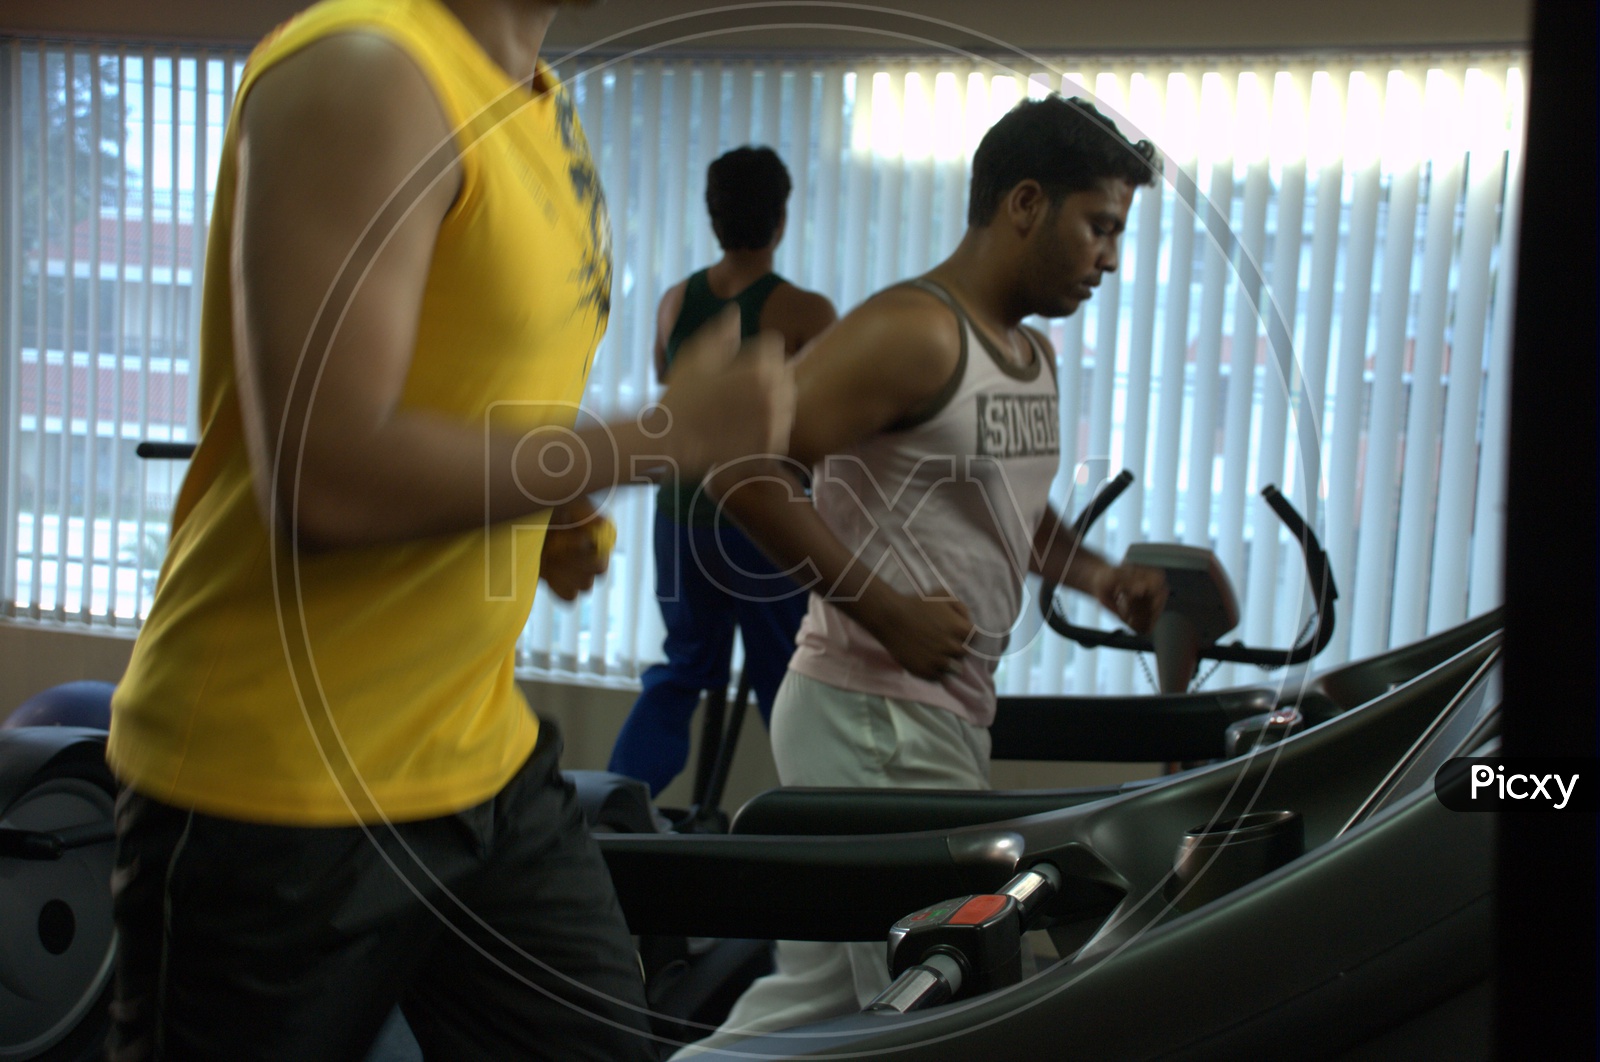 A man running on the Treadmill in a Gym